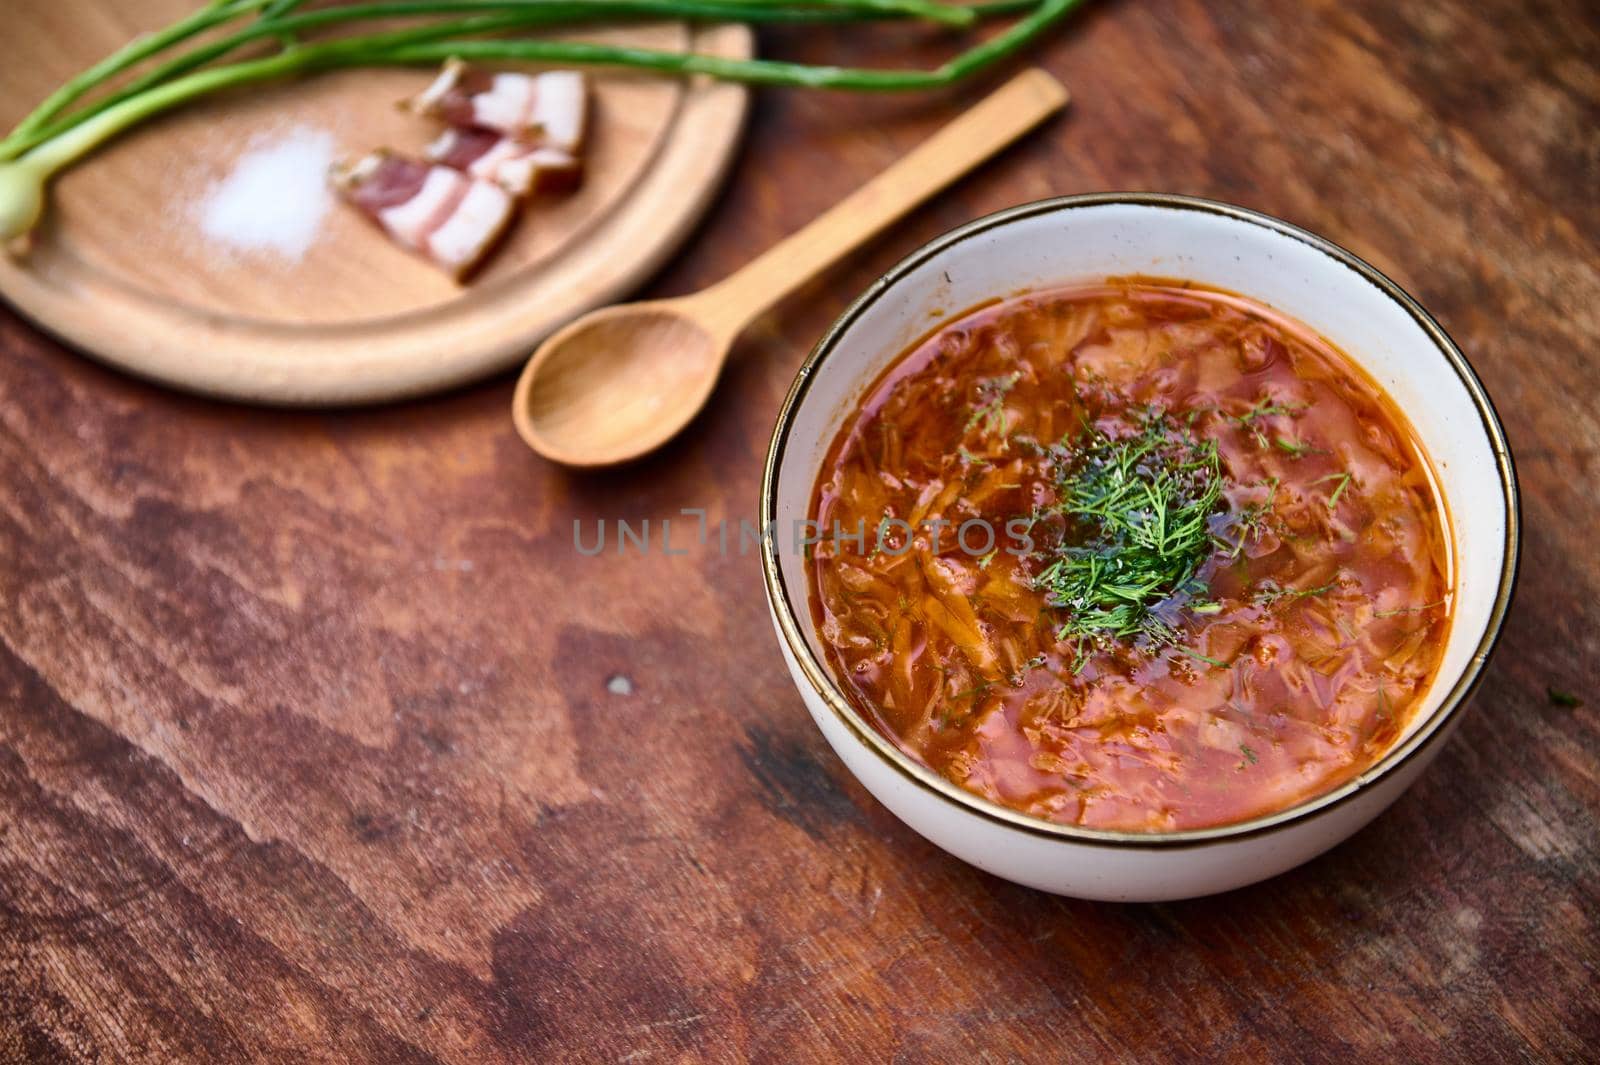 Ukrainian national dish: Borscht, sliced bacon, salt and green onions on wooden board against a wood table background by artgf